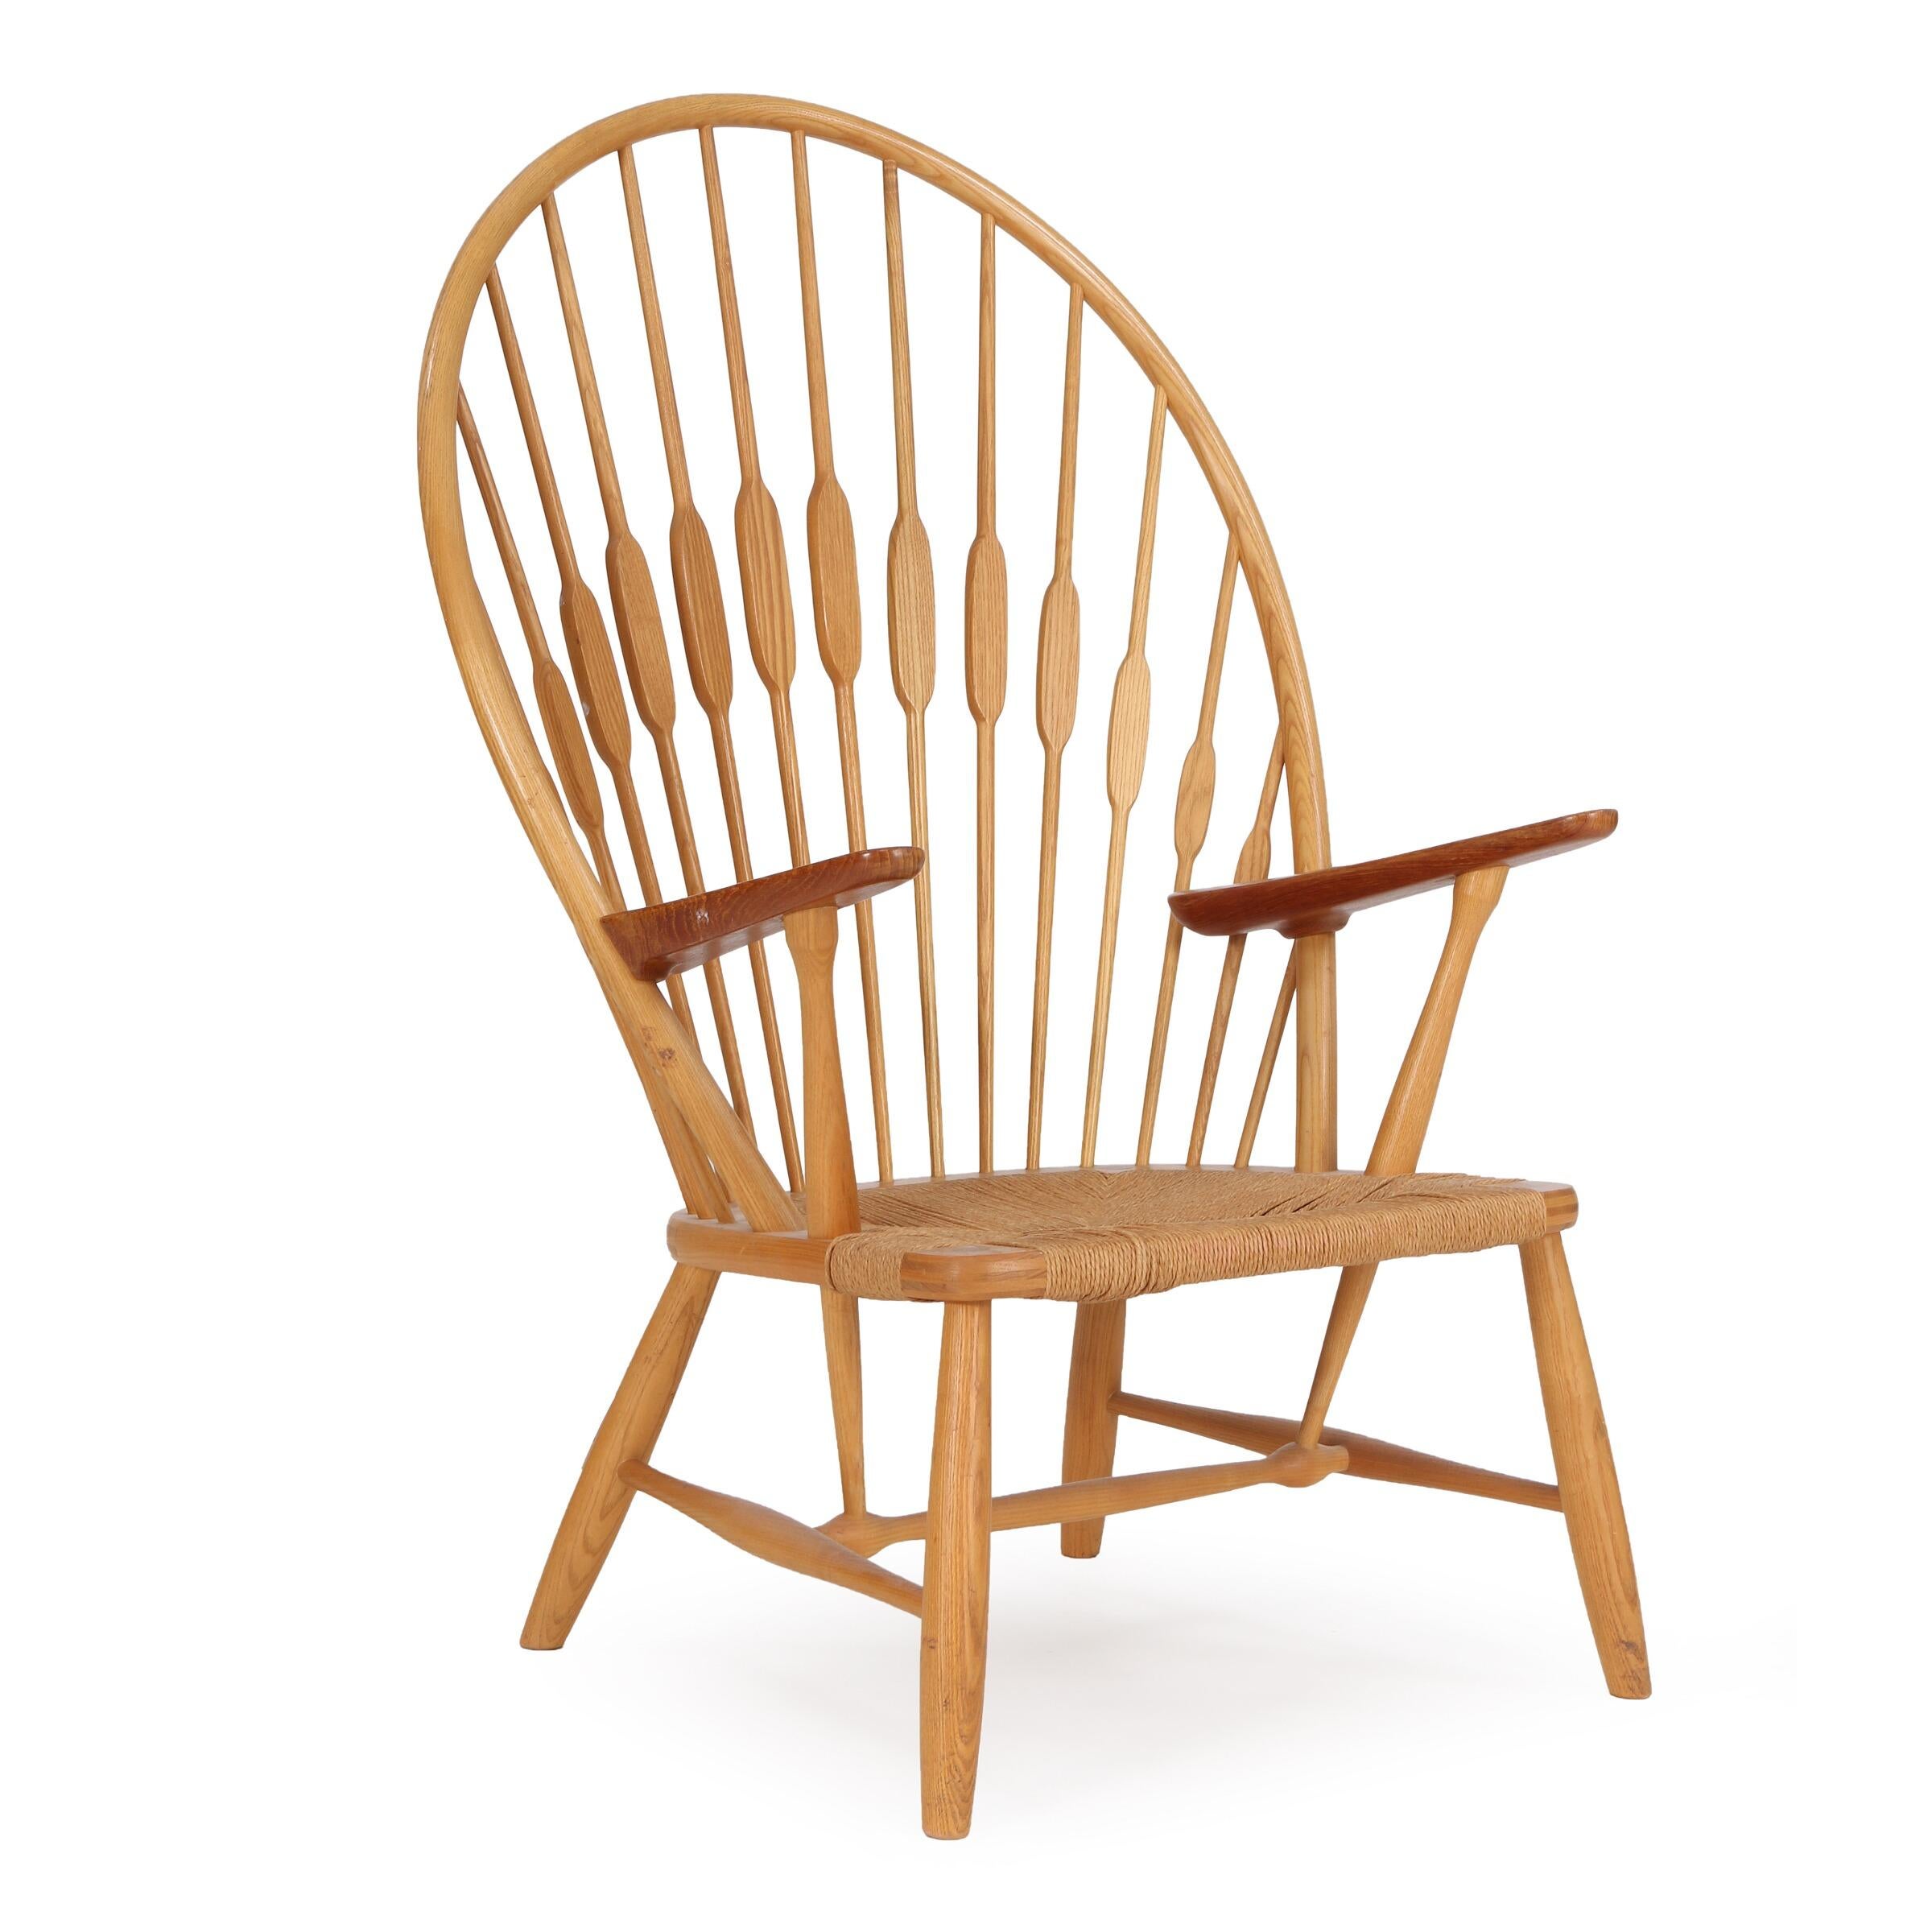 “Peacock Chair”. Easy chair with ash frame and teak armrests. Seat with woven paper cord. Model JH 550. Designed 1947. This example made approx. 1960s by cabinetmaker Johannes Hansen, stamped by maker.

Model presented at The Copenhagen